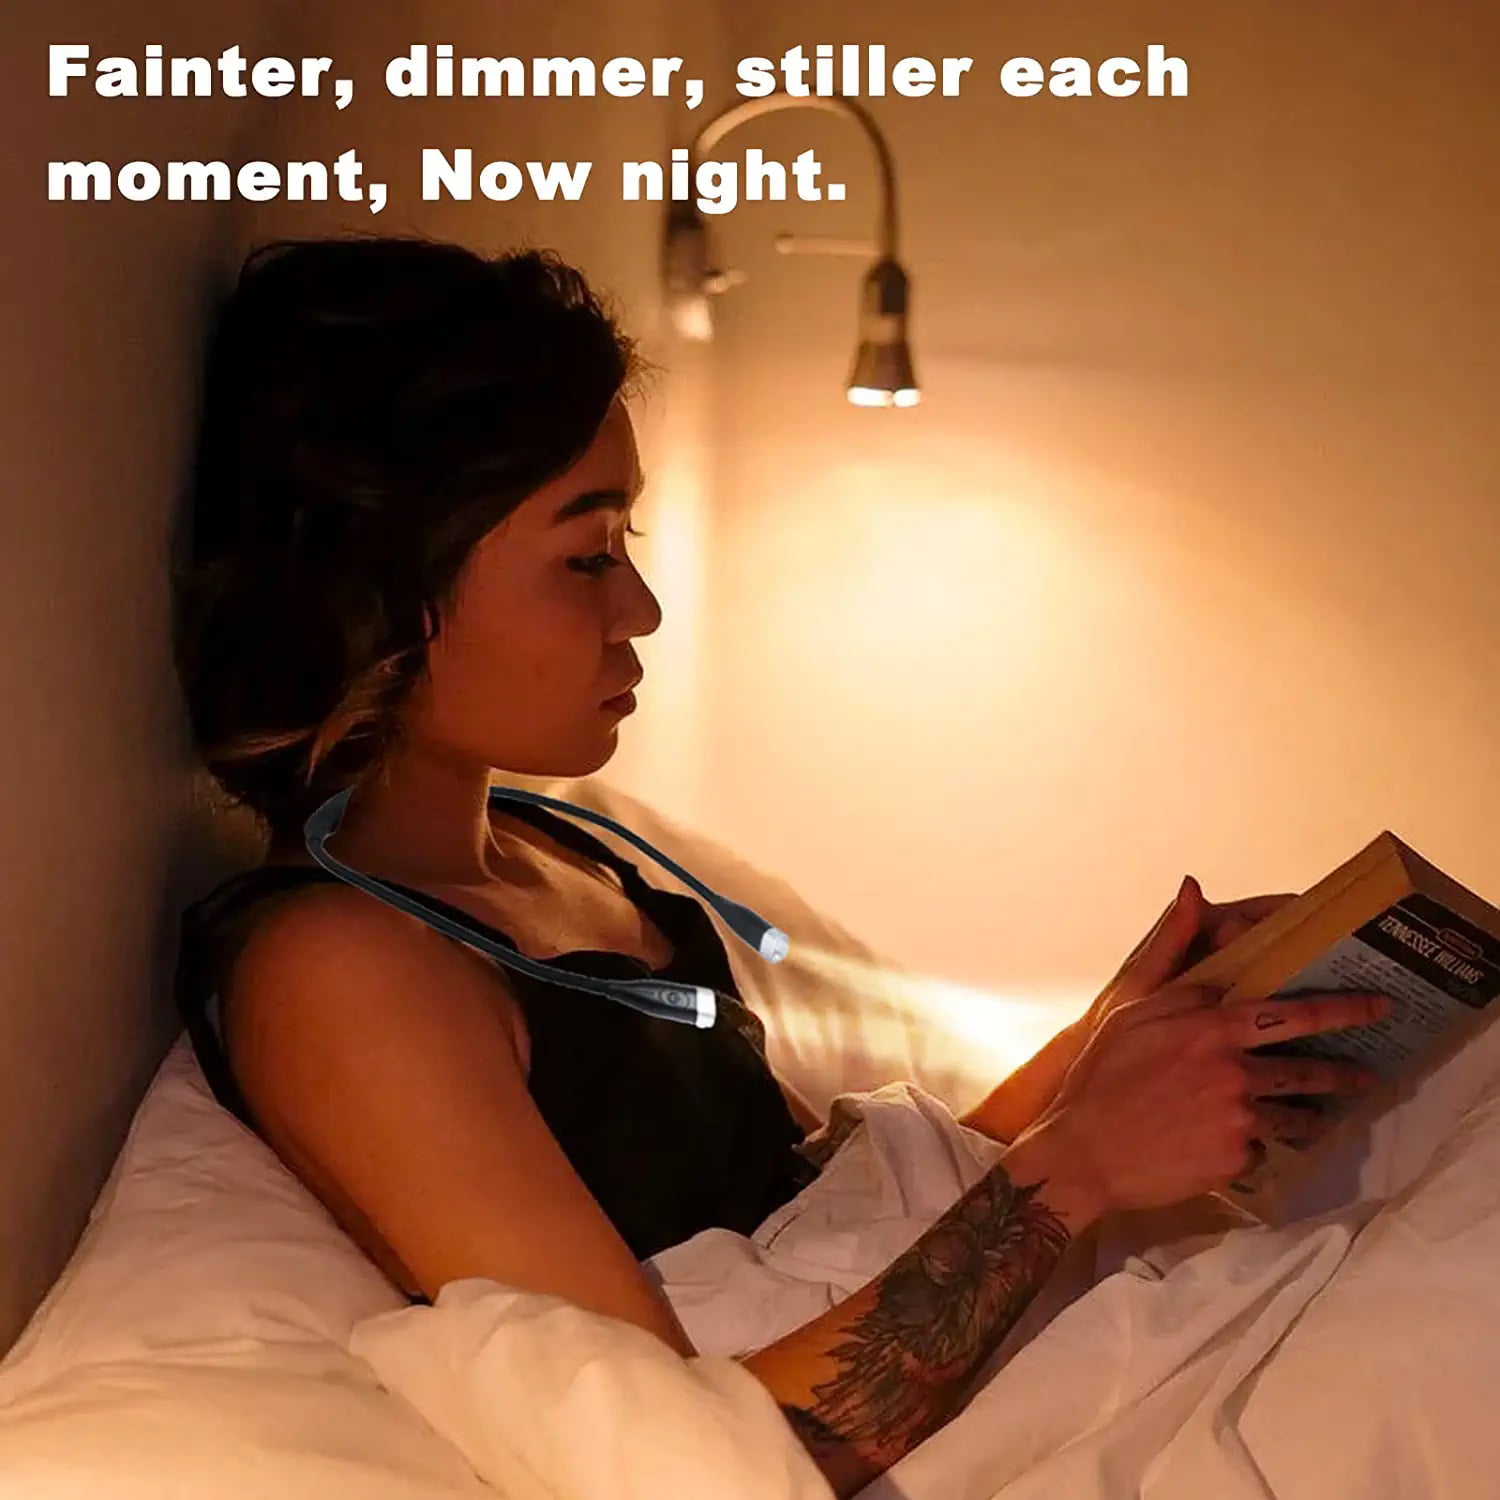 LED Neck Reading Light, Book Light for Reading in Bed - Bed Bath & Beyond -  32982780